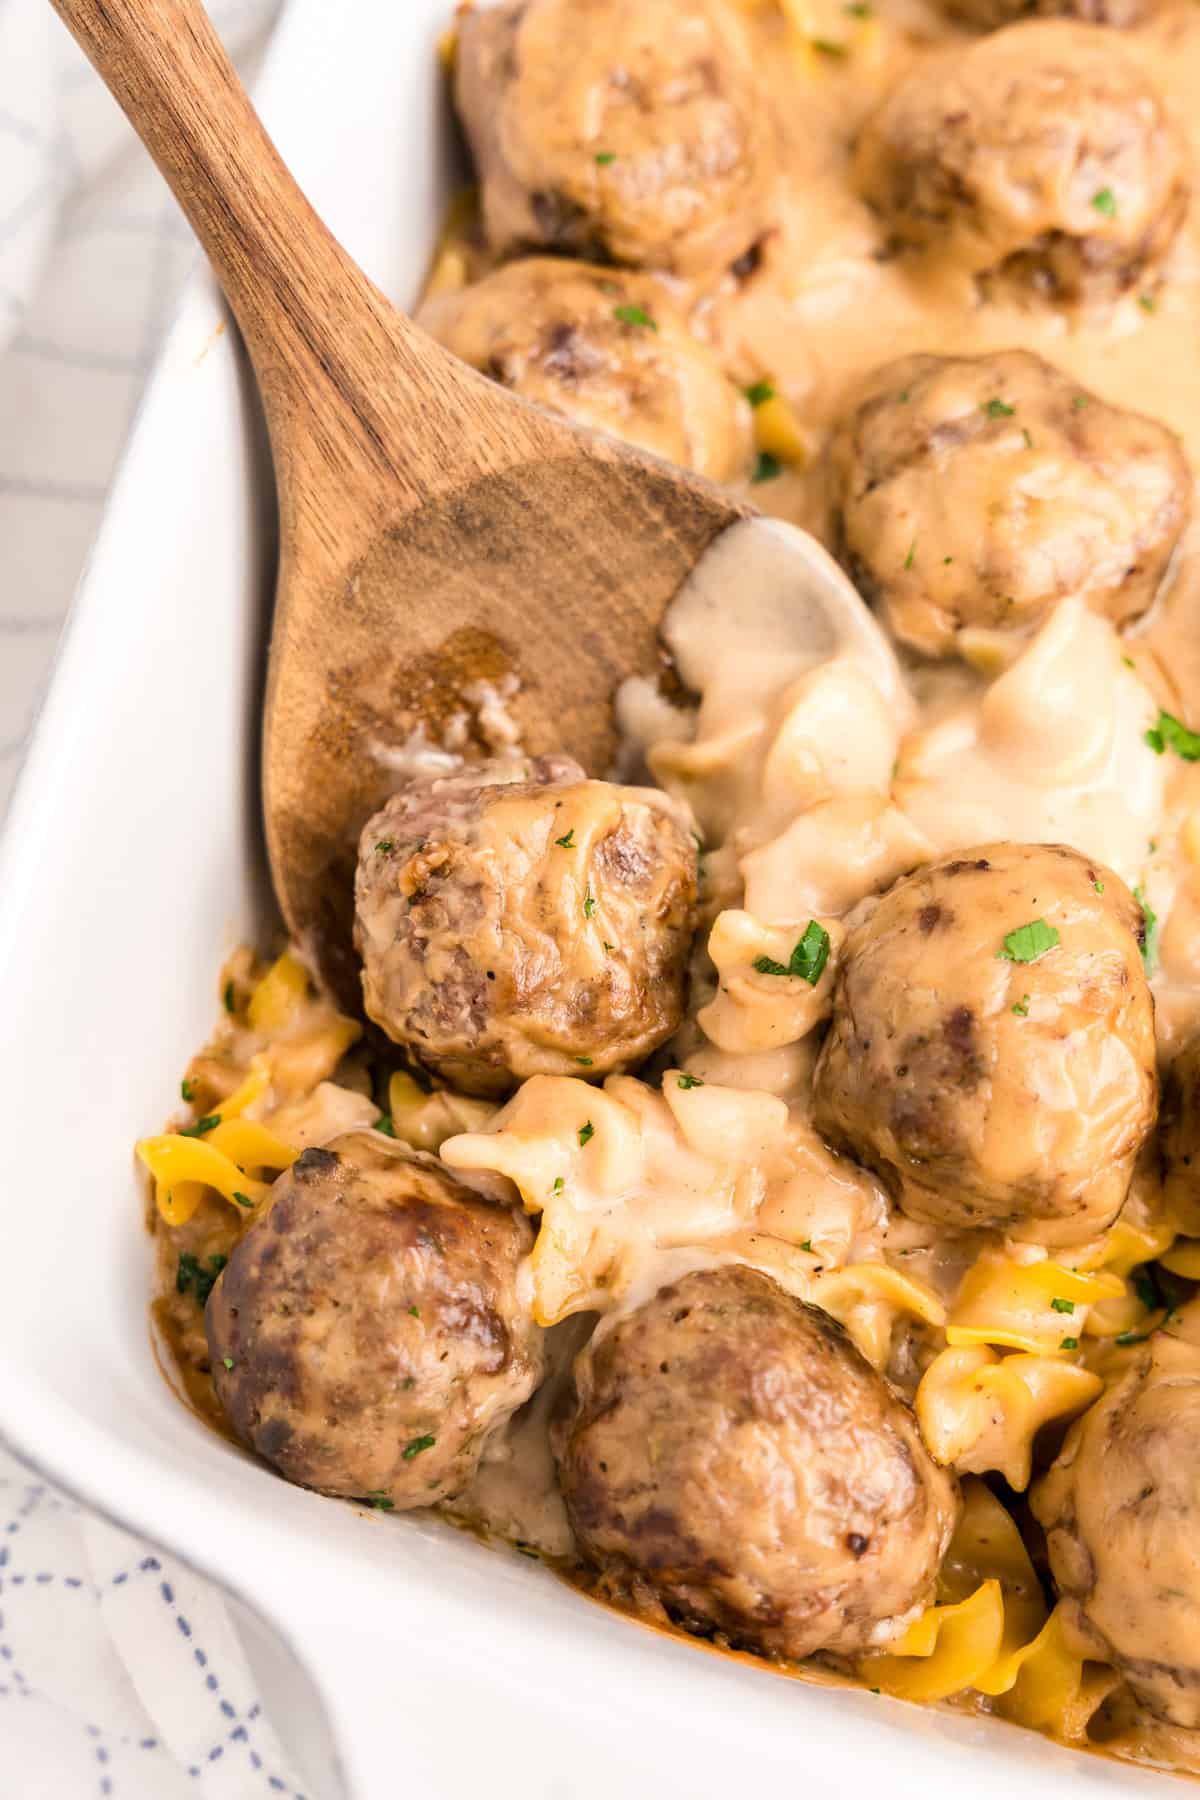 Wooden spoon scooping Swedish Meatball Casserole from white baking dish.